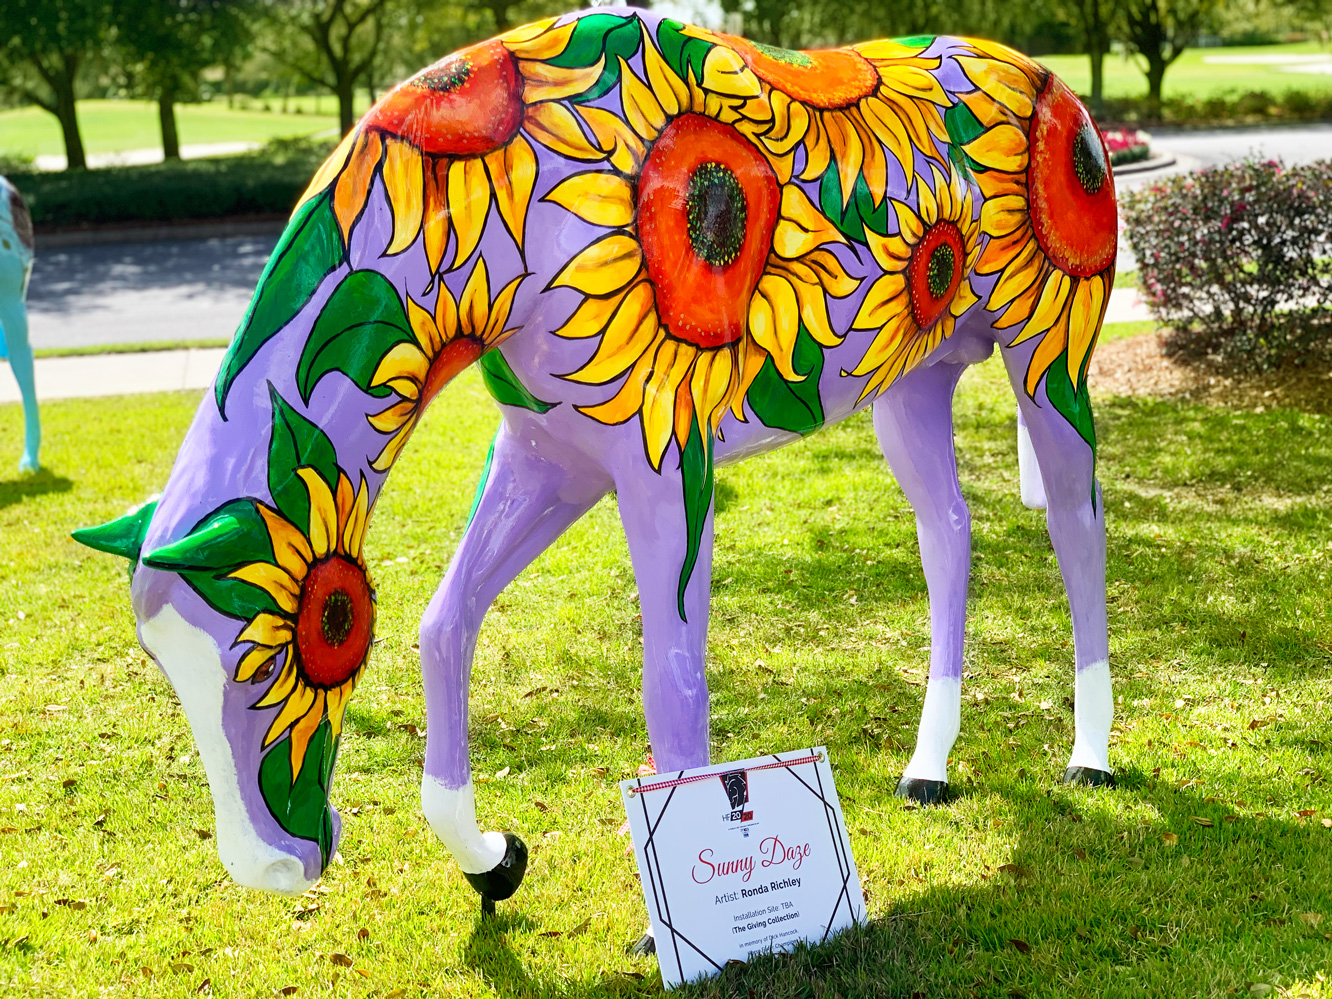 Sunny Daze- one of the three Horse Fever Horses in the Giving Collection.